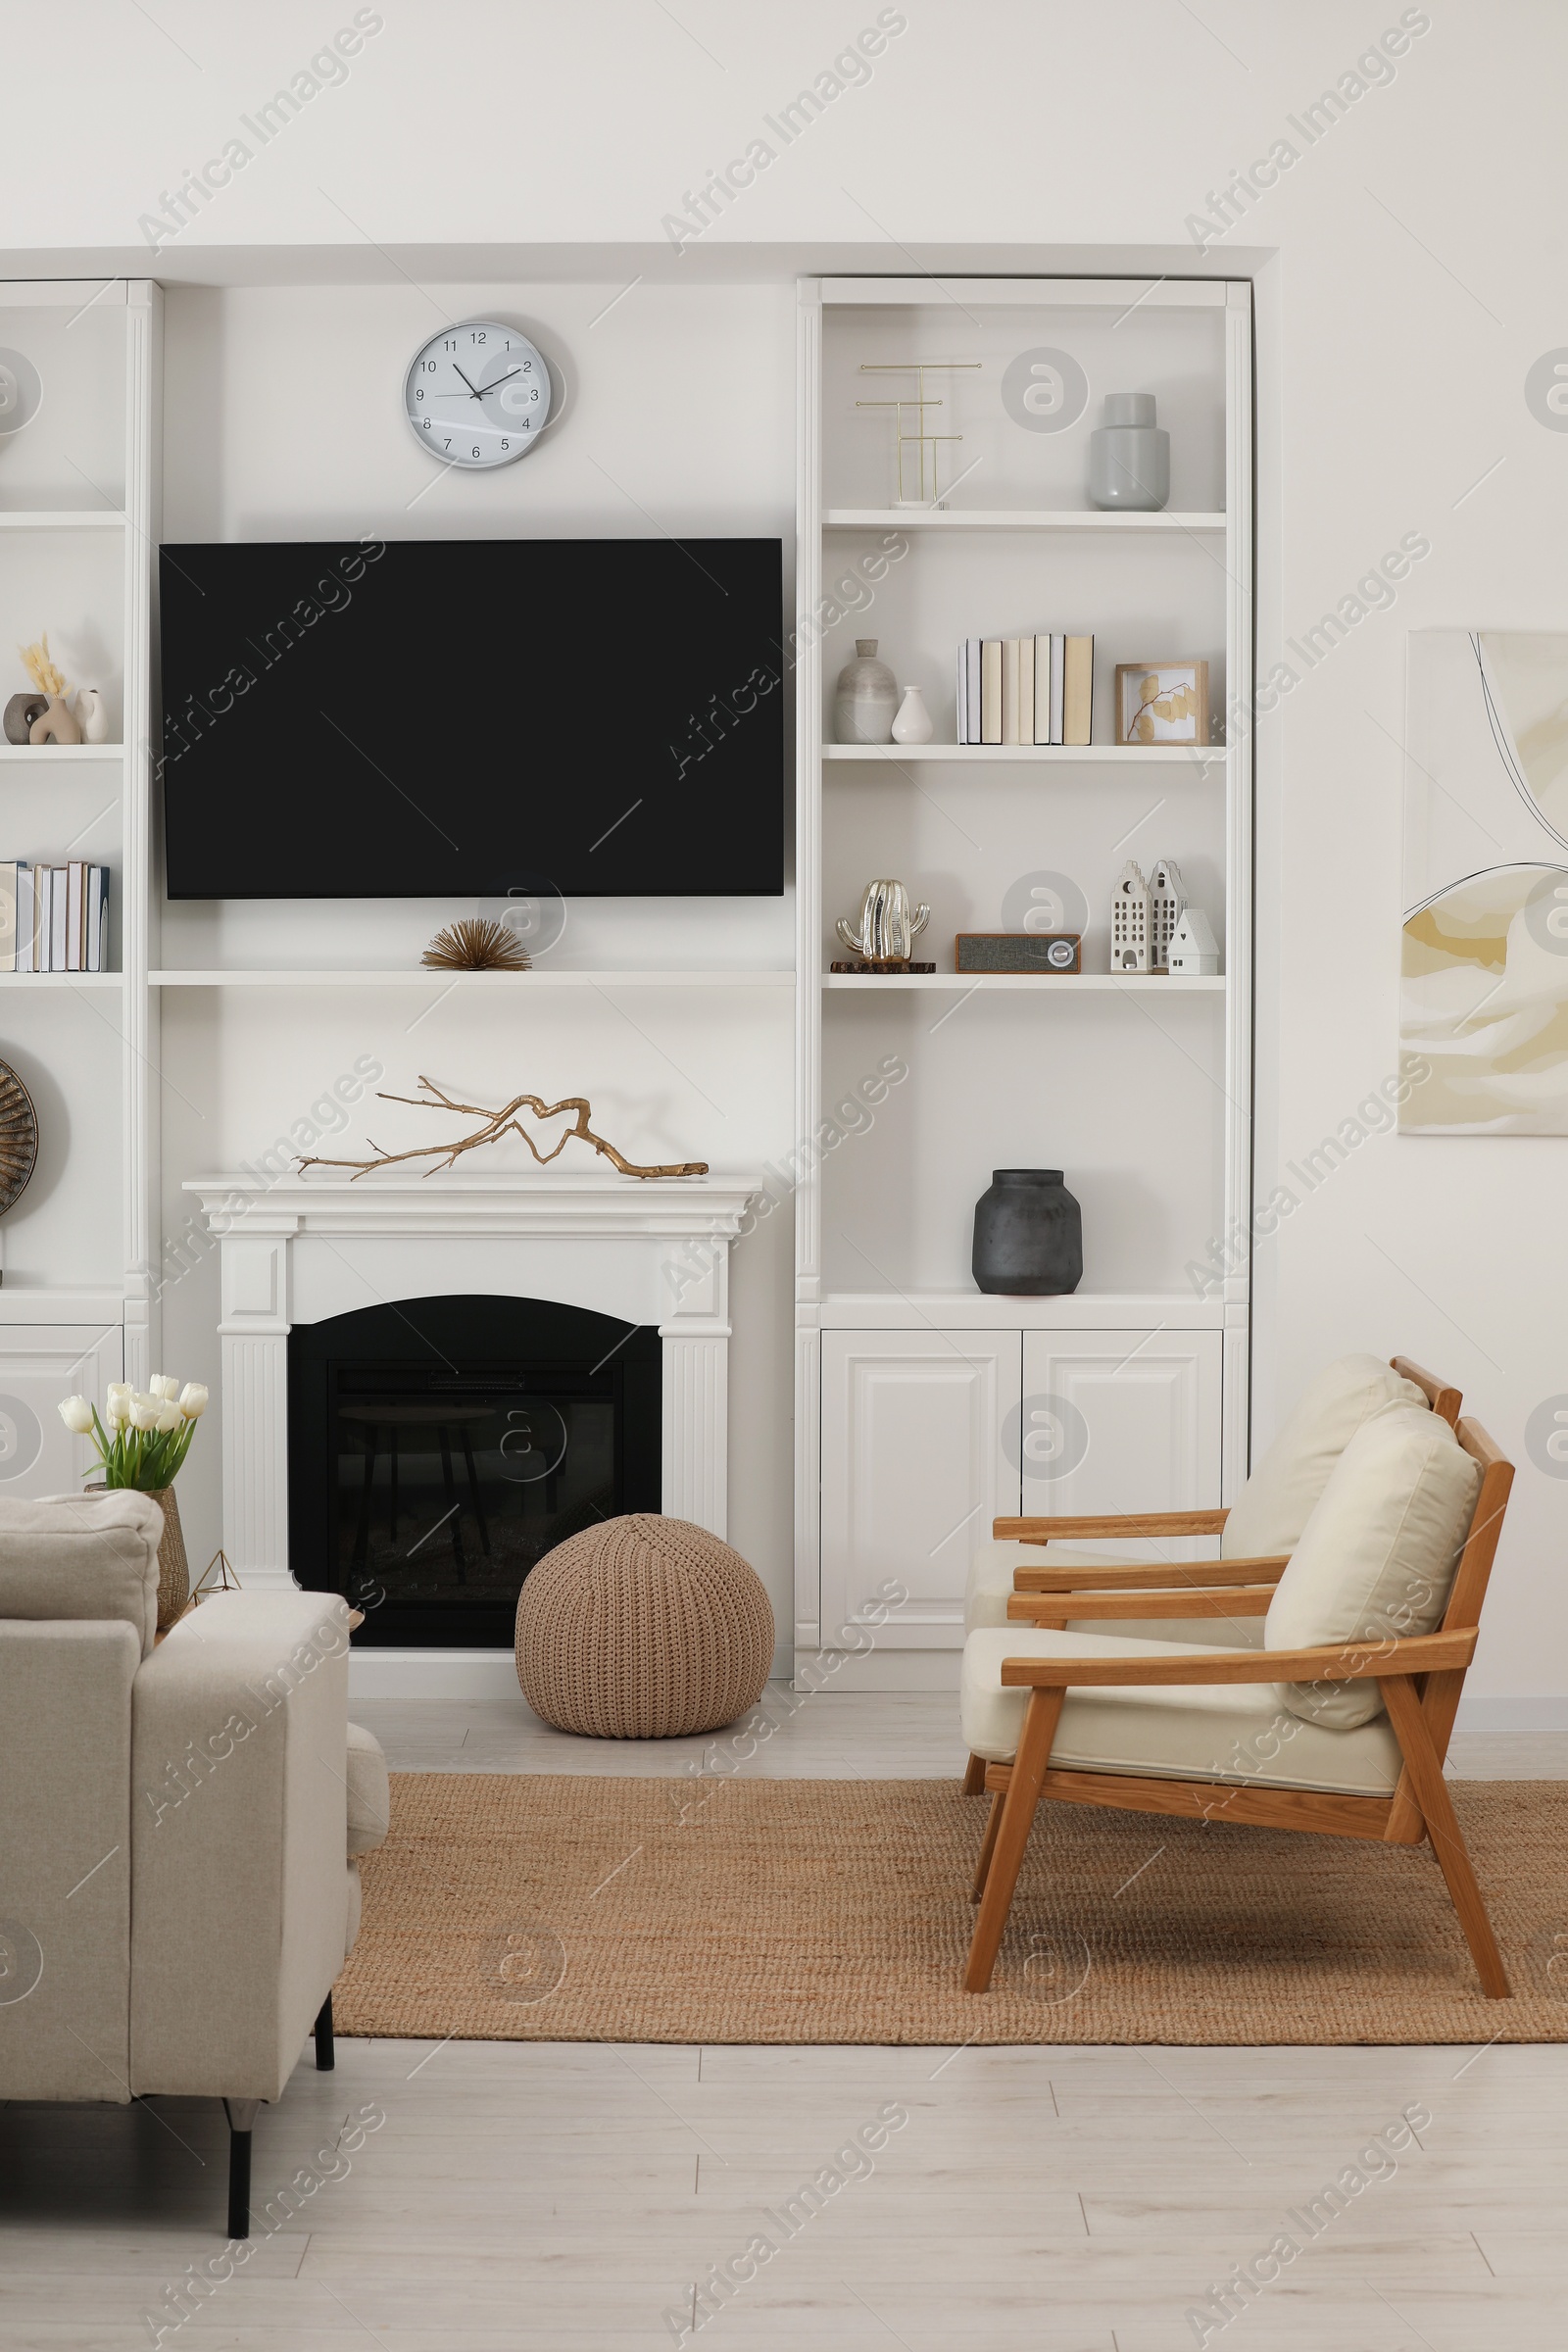 Photo of Cozy room interior with stylish furniture, decorative fireplace and TV set